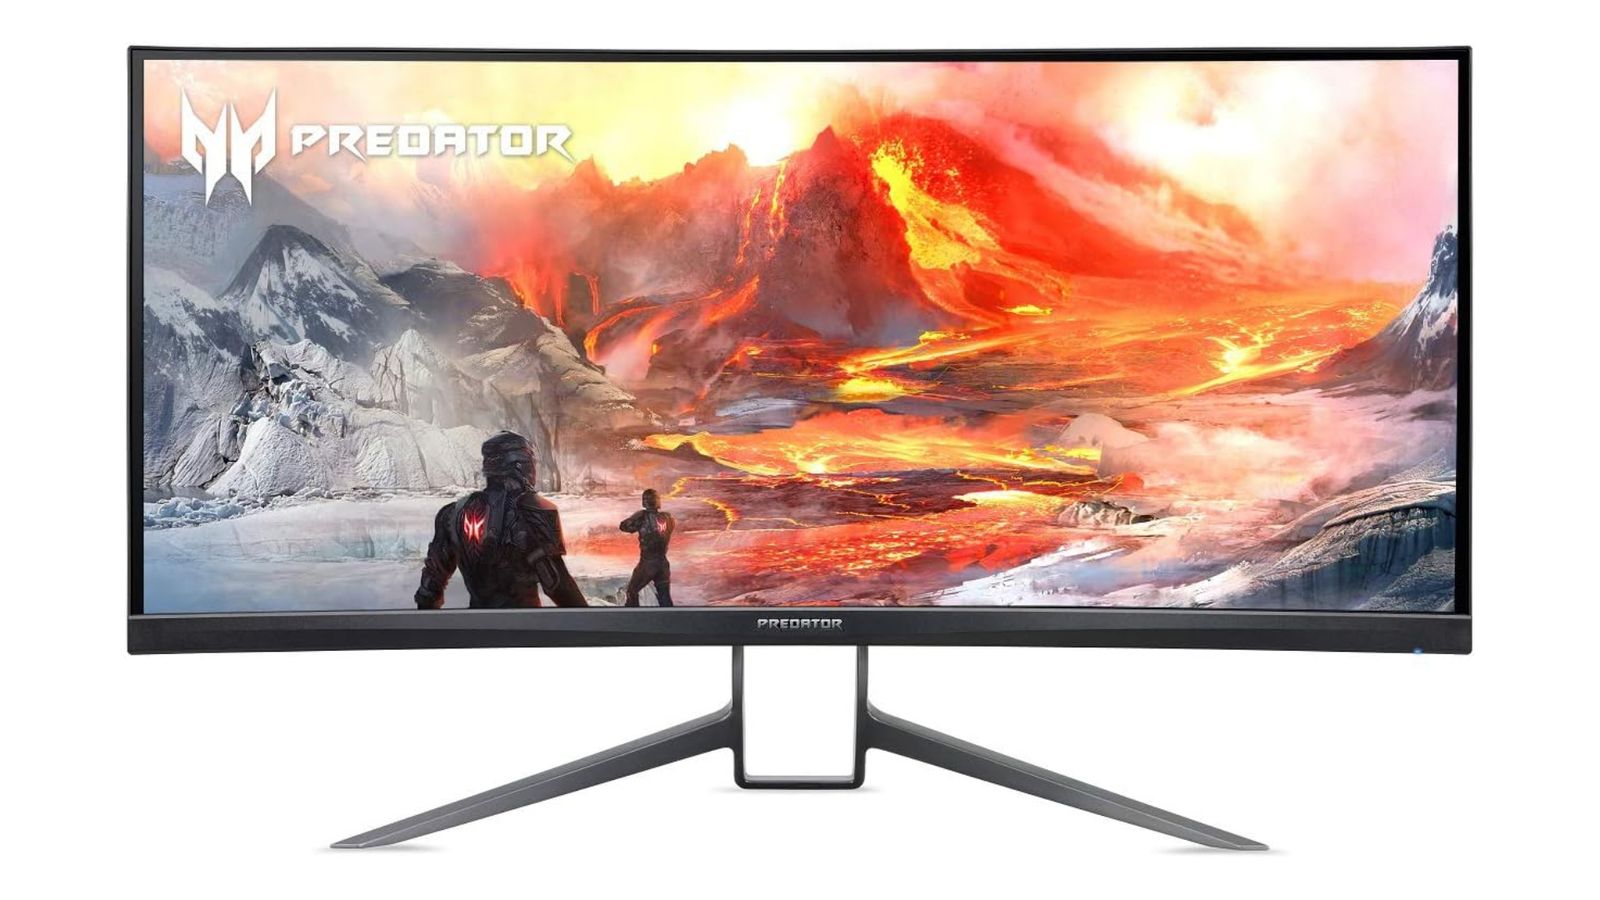 Acer Predator X35 product image of an ultrawide gaming monitor featuring an erupting volcano on the display.